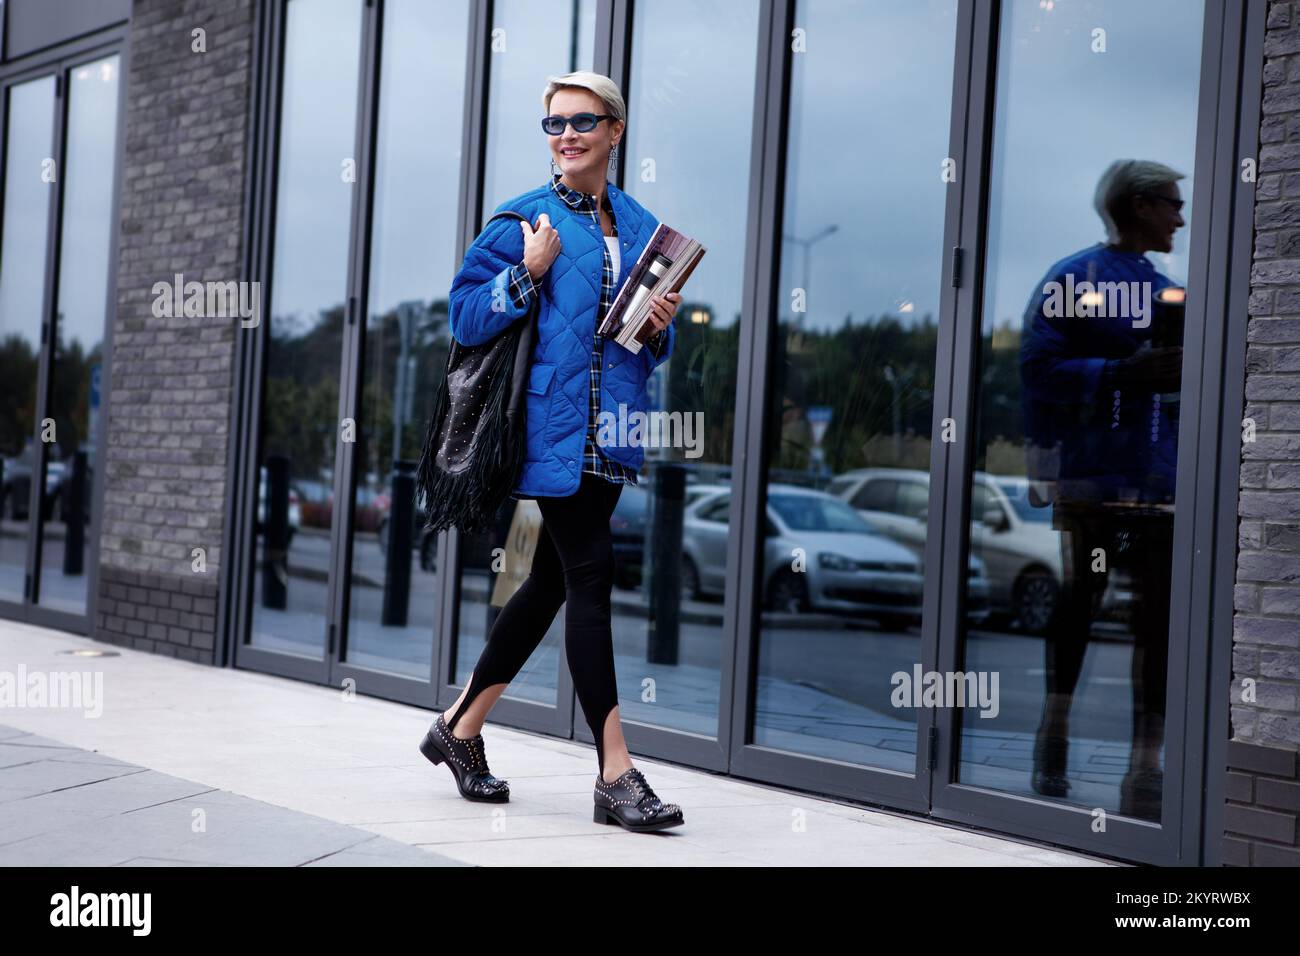 Fashionable woman with short hair walking street dressed in stylish casual outfit, blue colorful jacket and sunglasses, black leather handbag and boot Stock Photo